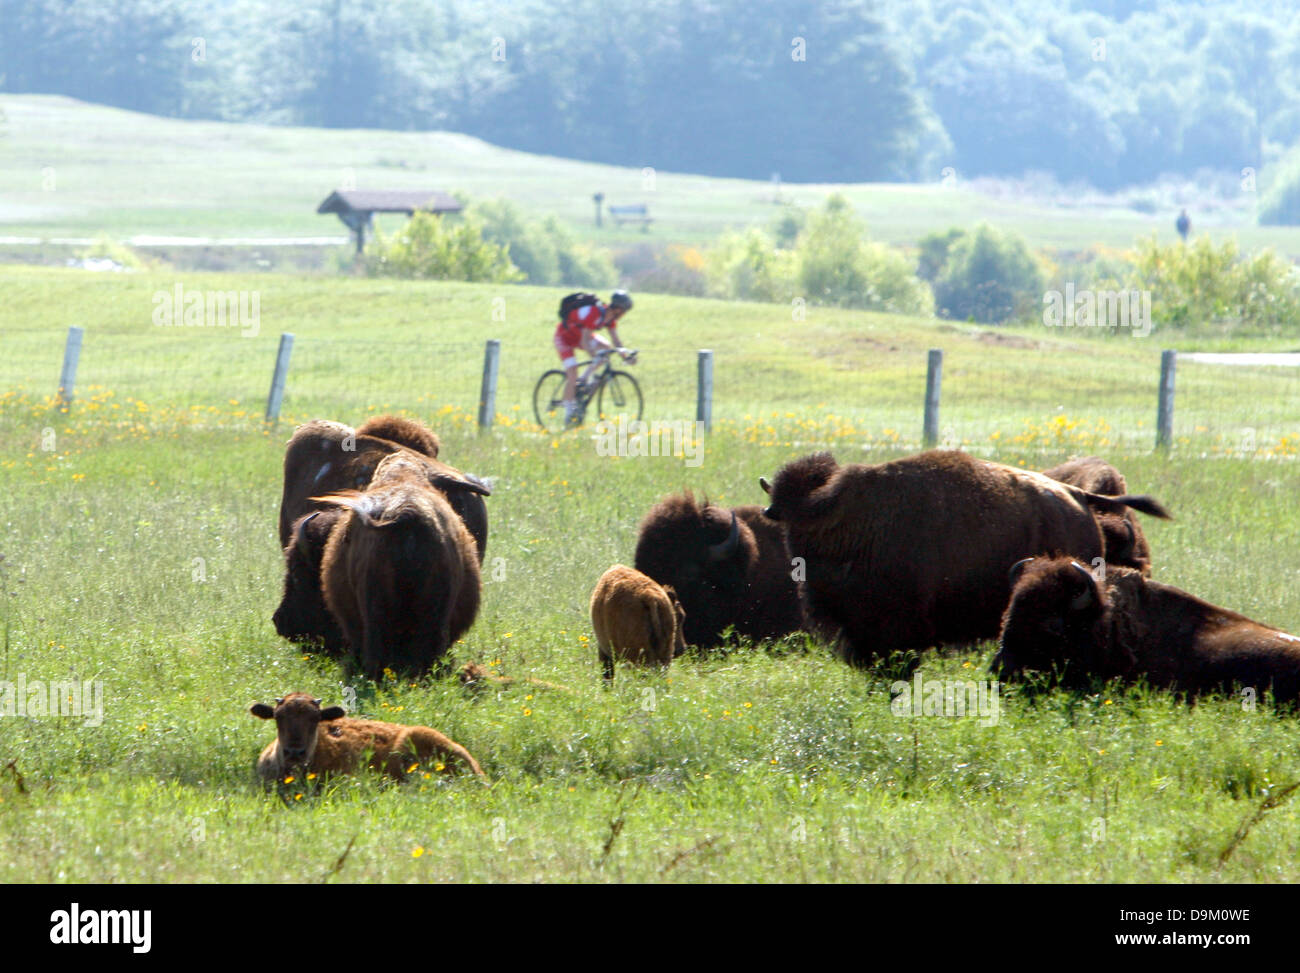 June 19, 2013 - Memphis, Tennessee, U.S. - June 19, 2013 - Baby buffalo and their mothers graze, sleep and cool off in the lake at Shelby Farms. The Shelby Farms Park buffalo herd now numbers 24, thanks to the birth of 7 baby buffalo this summer. ItÃ¢â‚¬â„¢s estimated that 30-60 million buffalo once roamed North America, including Tennessee.  They were central and sacred to the lives of American Indians and were almost hunted to extinction. (Credit Image: © Karen Pulfer Focht/The Commercial Appeal/ZUMAPRESS.com) Stock Photo